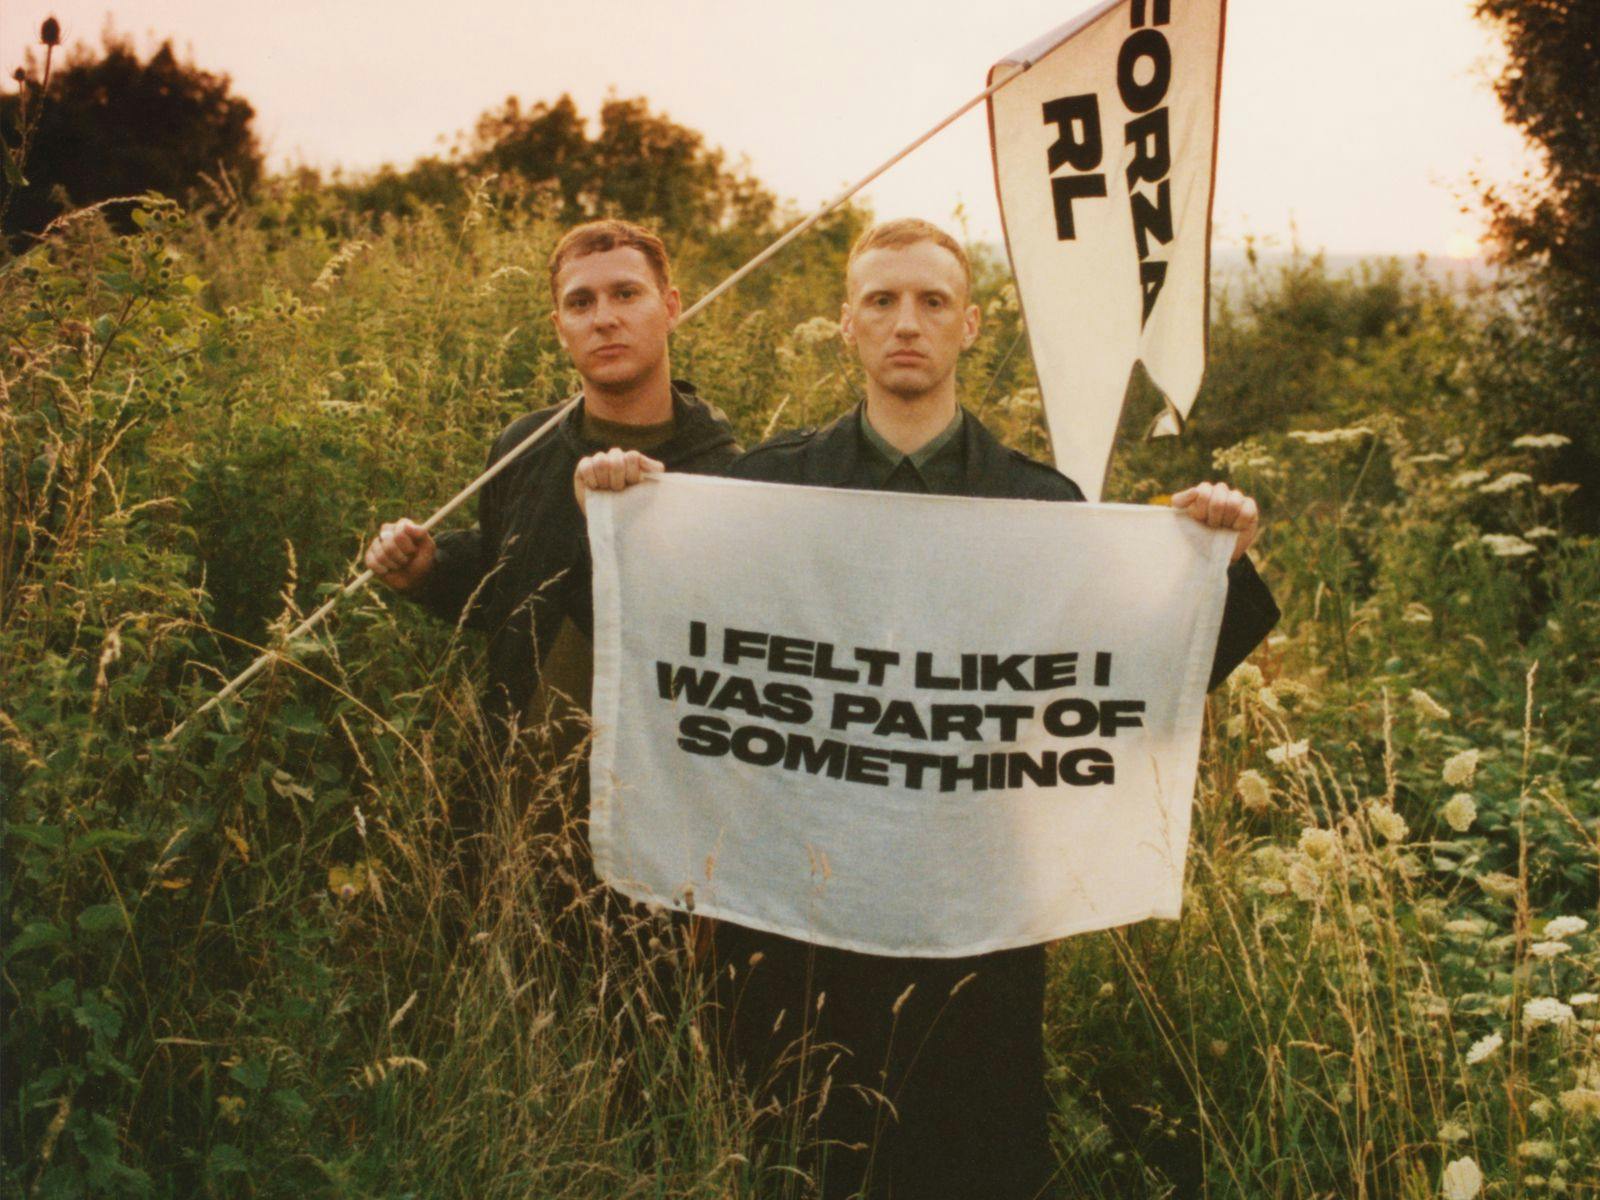 Real Lies holding up a cloth sign that reads "I felt like I was part of something".